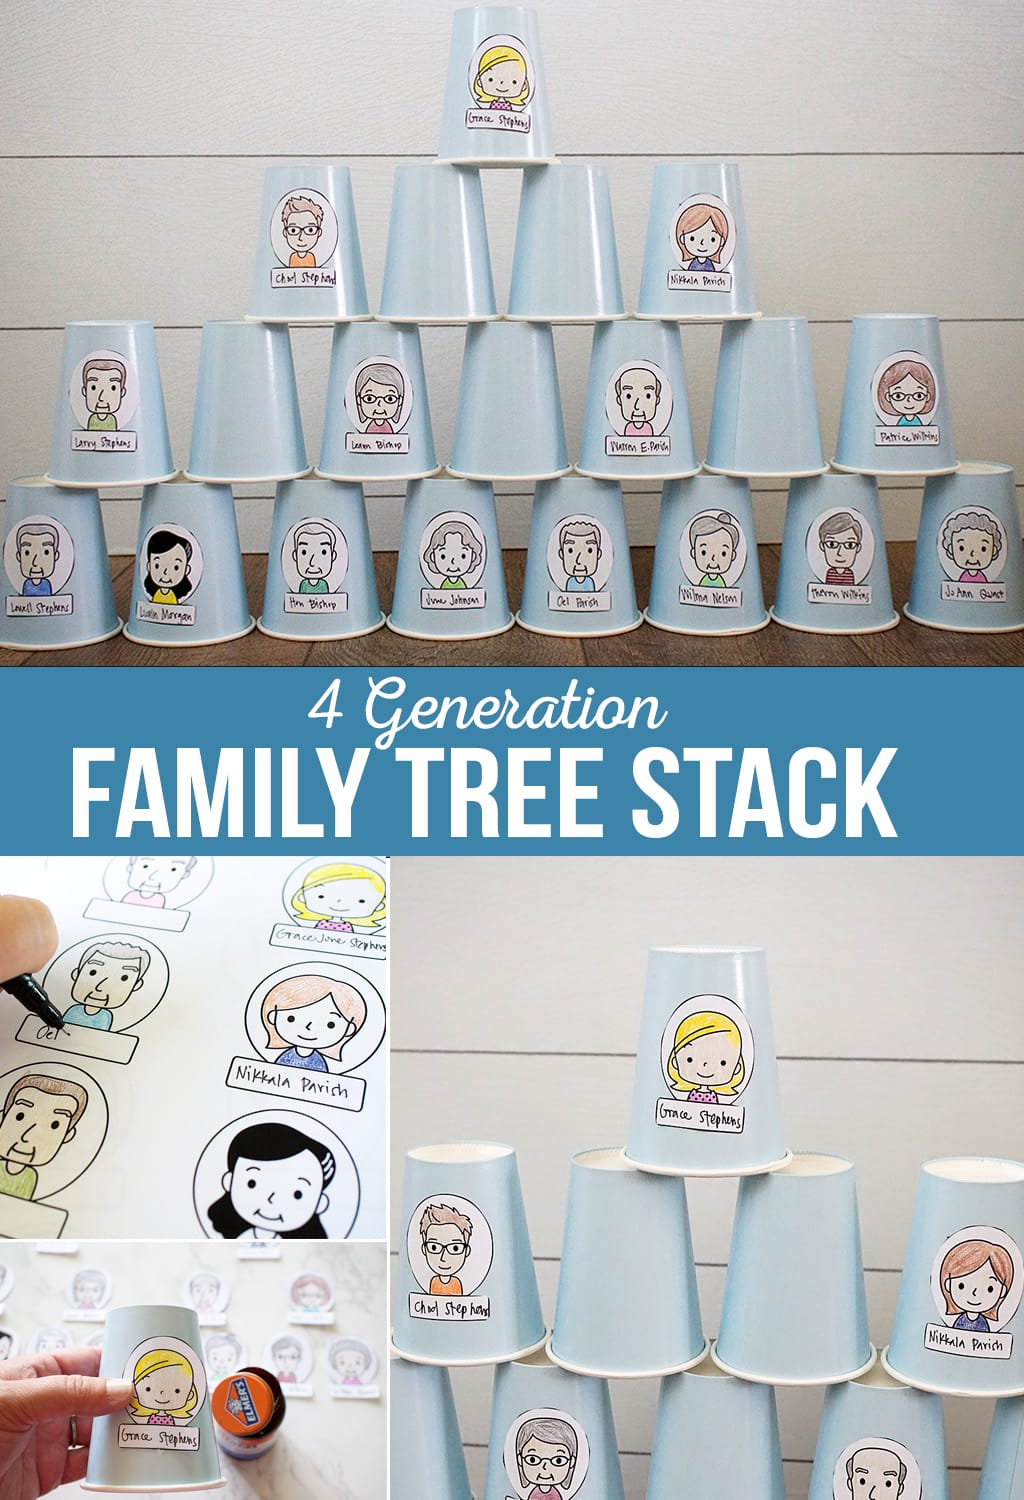 4 Generation Family Cup Stack | Get to know your family tree with a fun cup stack activity! Printables and instructions to make your own family stack. #familytree #printables #activitydays #familyhomeevening